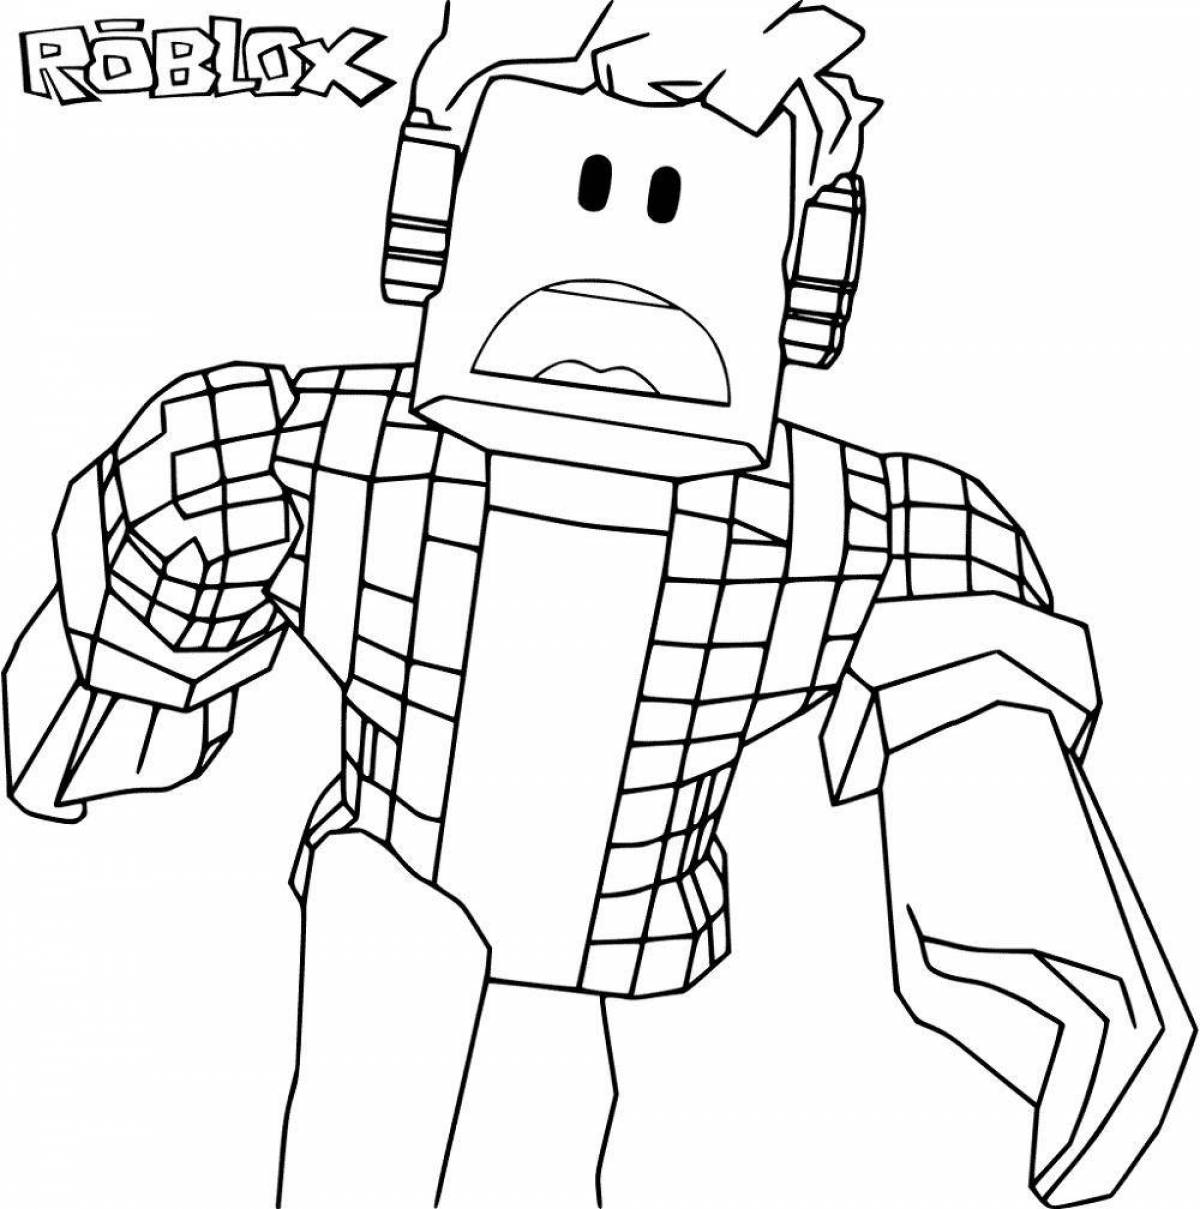 Color-brilliant roblox coloring page for boys 10 years old